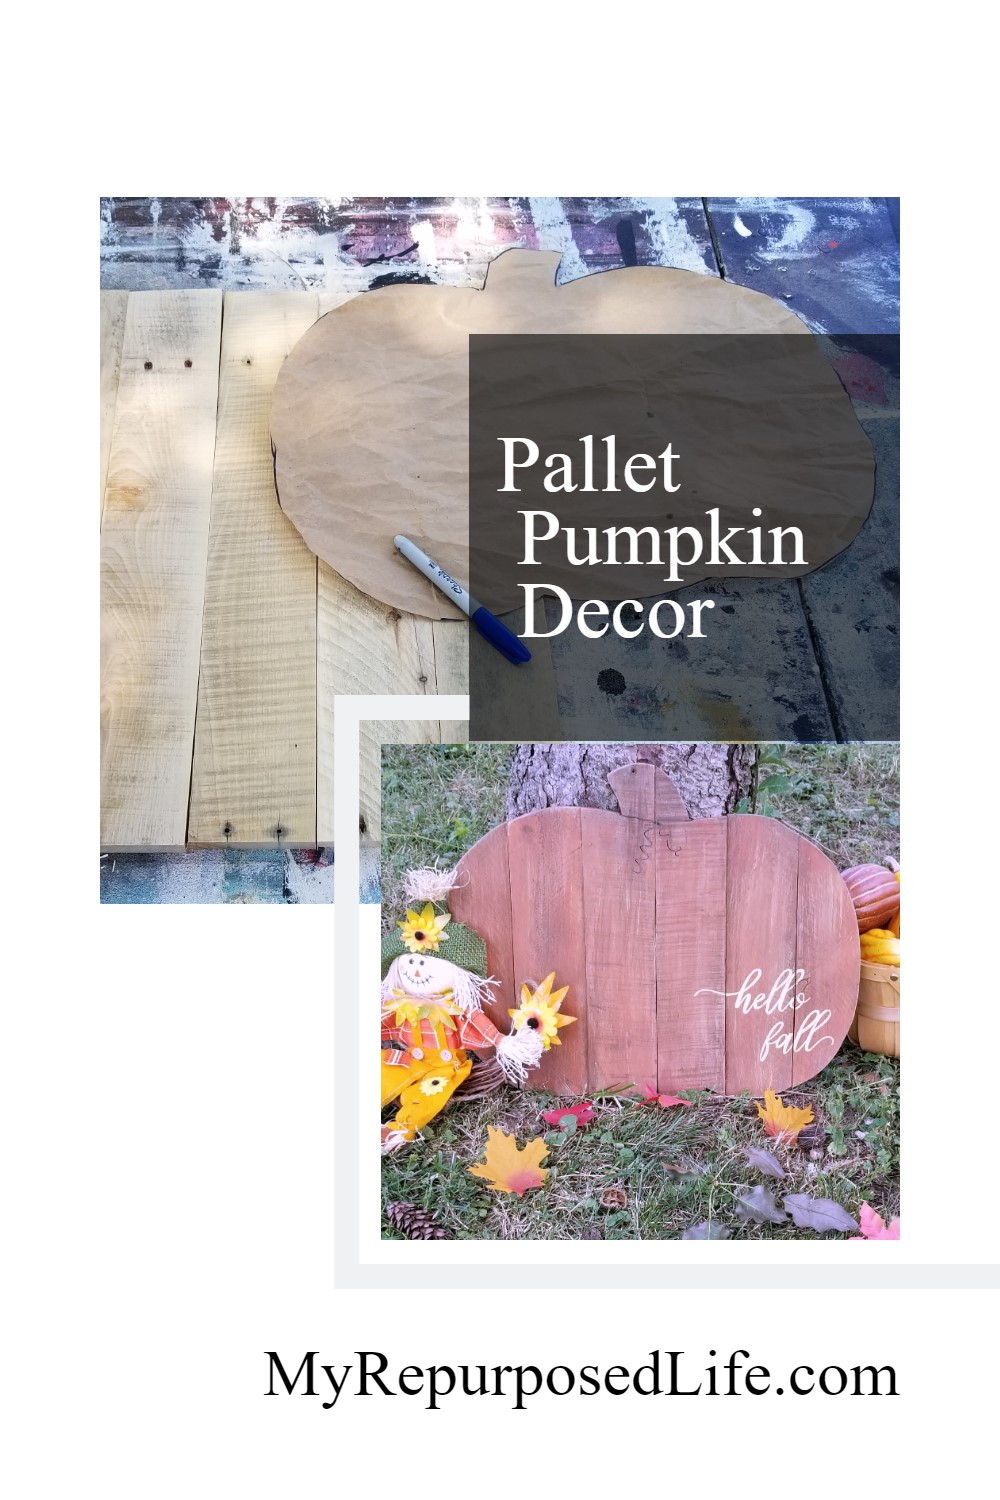 How to make a rustic pallet pumpkin hello fall sign. Step by step tips for building and painting a rustic pallet sign for Fall. #MyRepurposedLife #repurposed #upcycled #pallet #fall #pumpkin via @repurposedlife